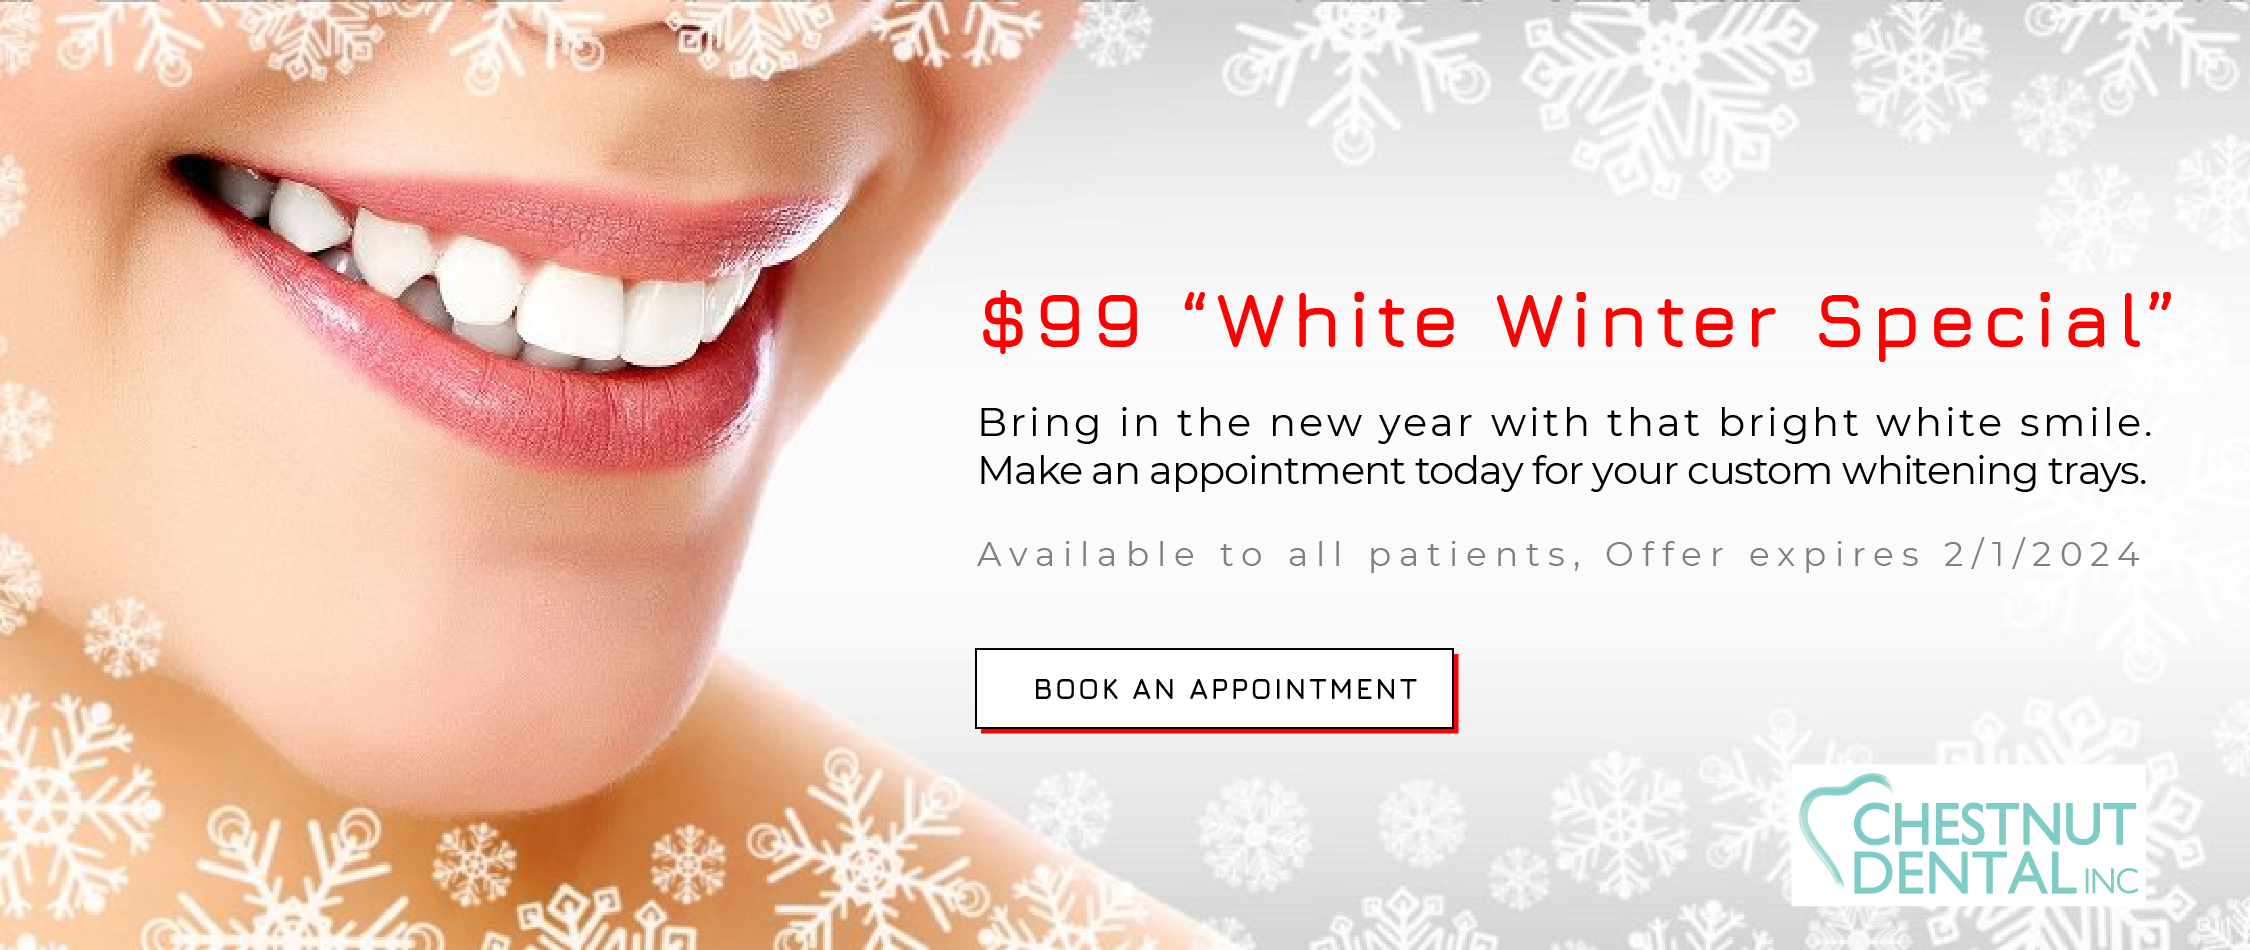 White Winter Special – Tips for whitening your teeth during the holidays